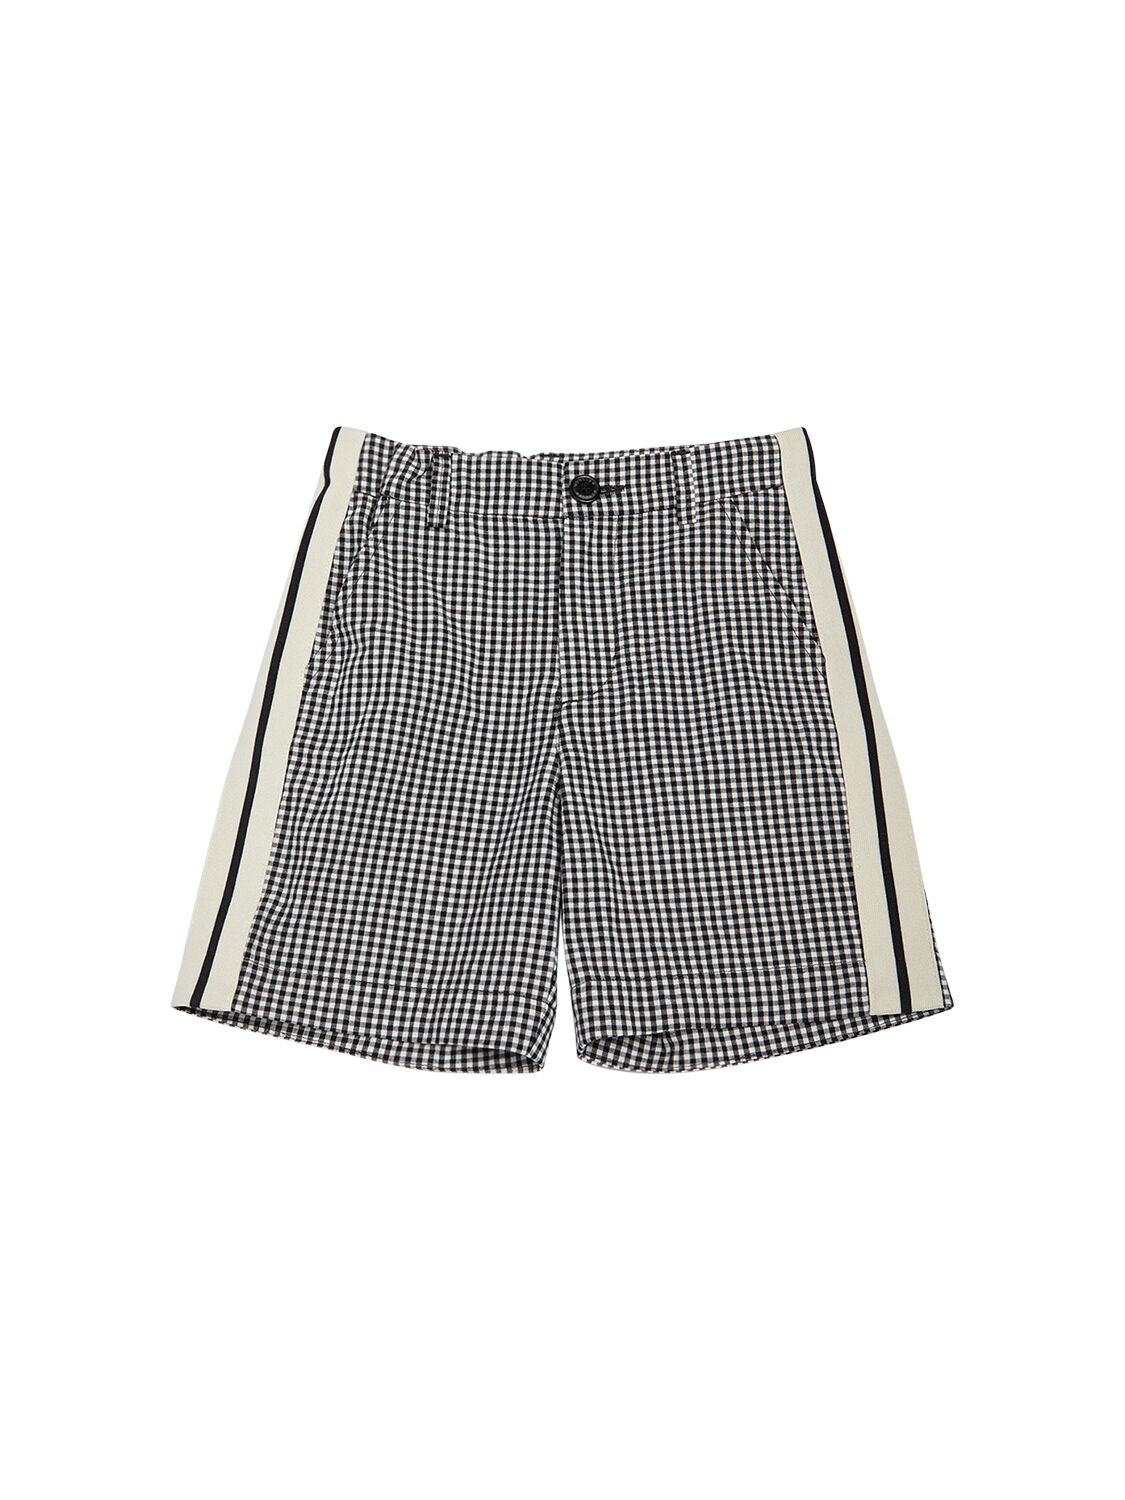 Image of Gingham Printed Cotton Shorts